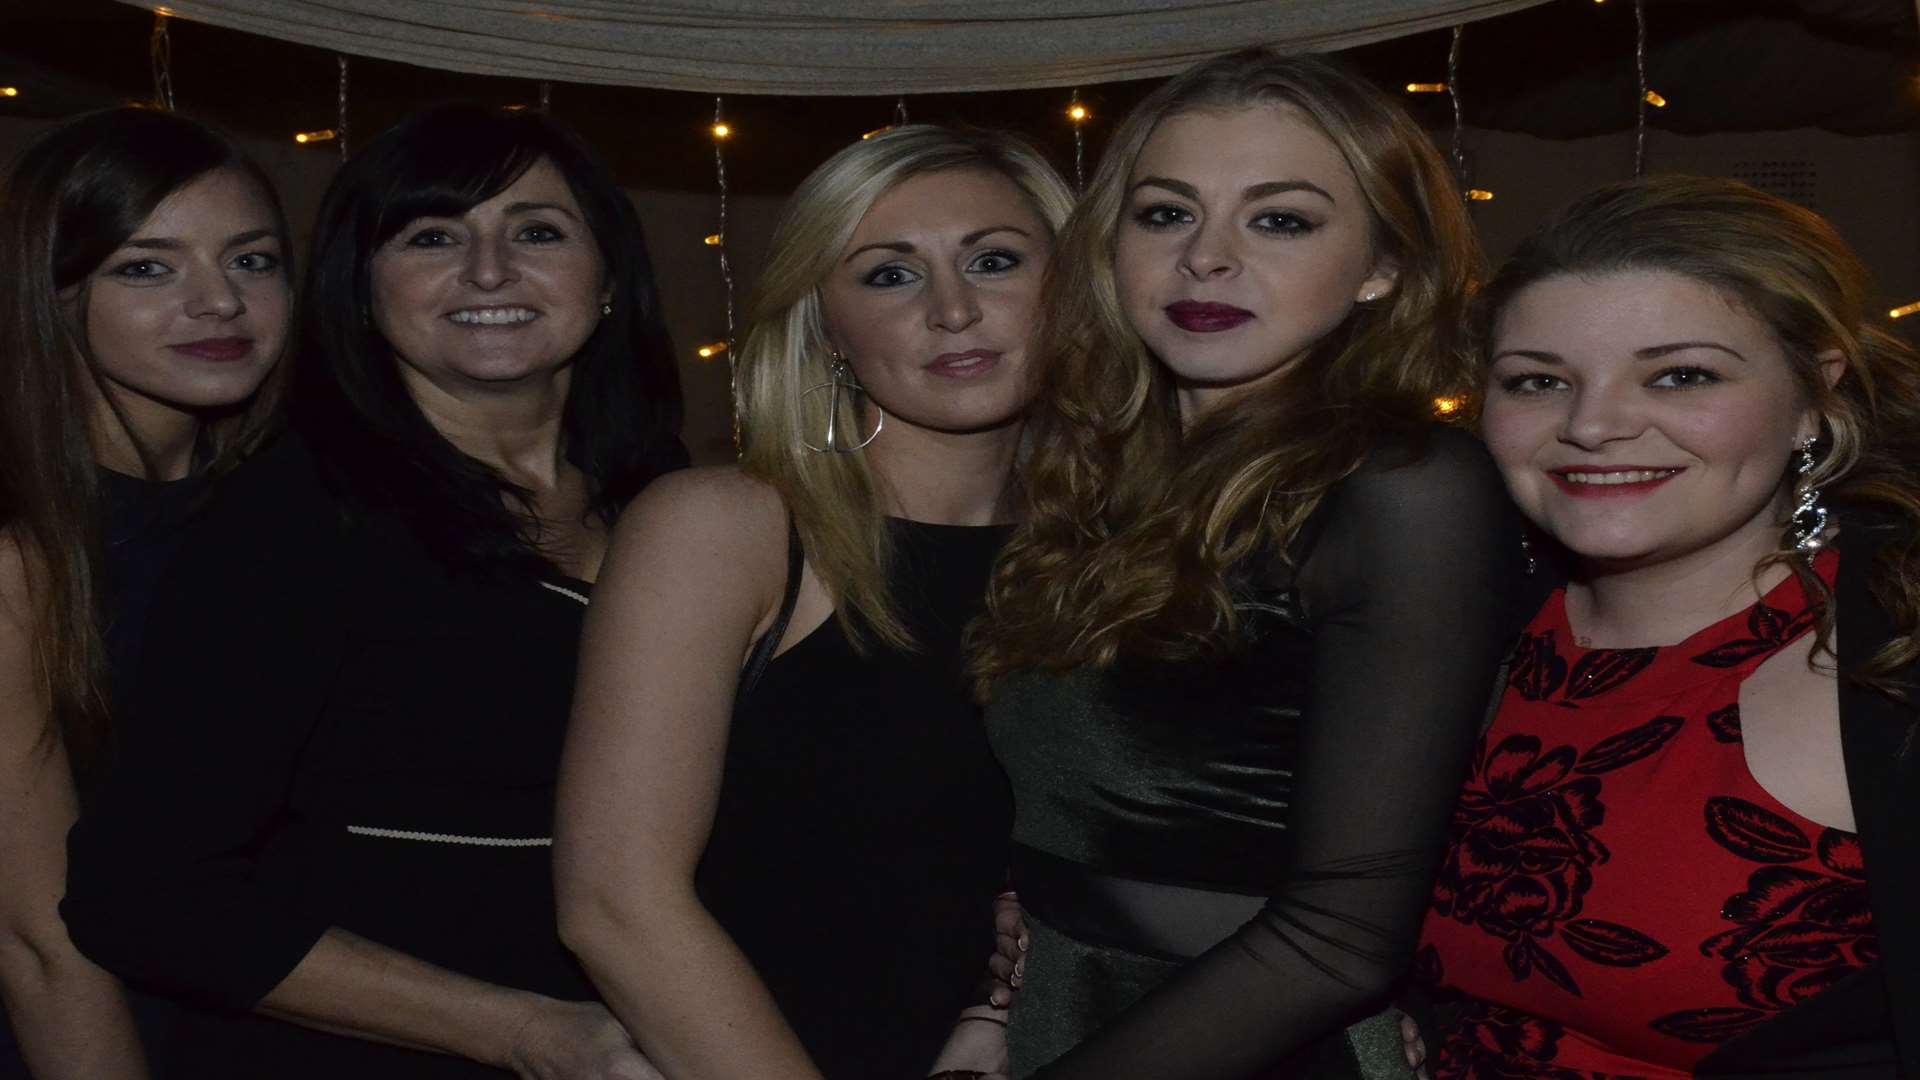 Kerrie Keep (sister) Theresa (mum), Chloe (sister) Kirsty Keep and her friend Holli Hughes at a fundraising event